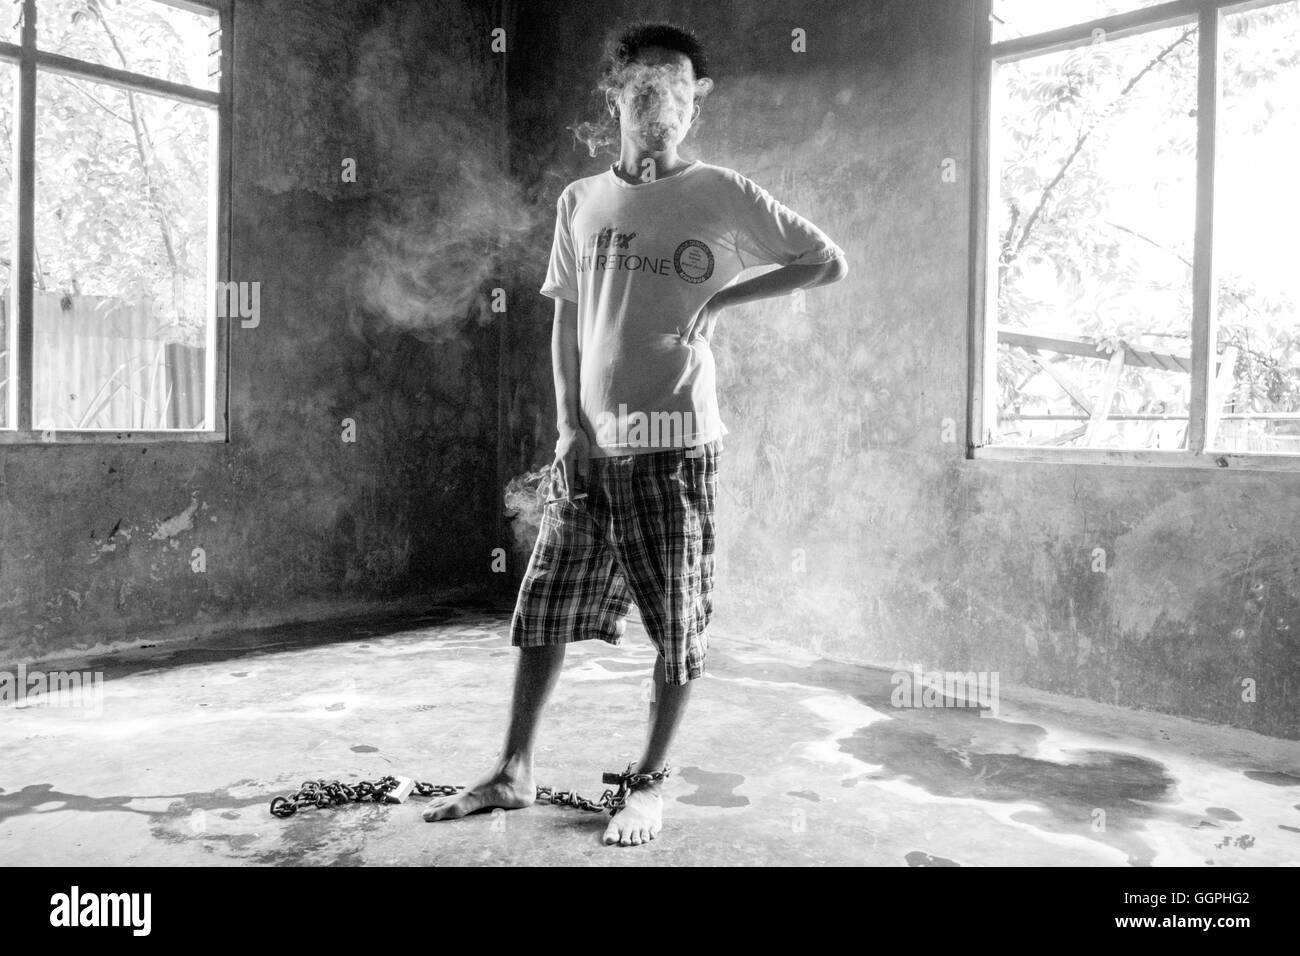 Yohanes Angsel, 33, suffers from mental illness and been chained to the floor of a room in his parents house since 2004. According to Human Rights Watch there are at least 18,800 people currently being shackled in Indonesia due to mental illness. Family members say relatives are shackled or chained up to prevent them from doing harm to themselves. Also, it's often the case that people in rural areas don’t have the facilities or know how to care for the mentally ill. Stock Photo